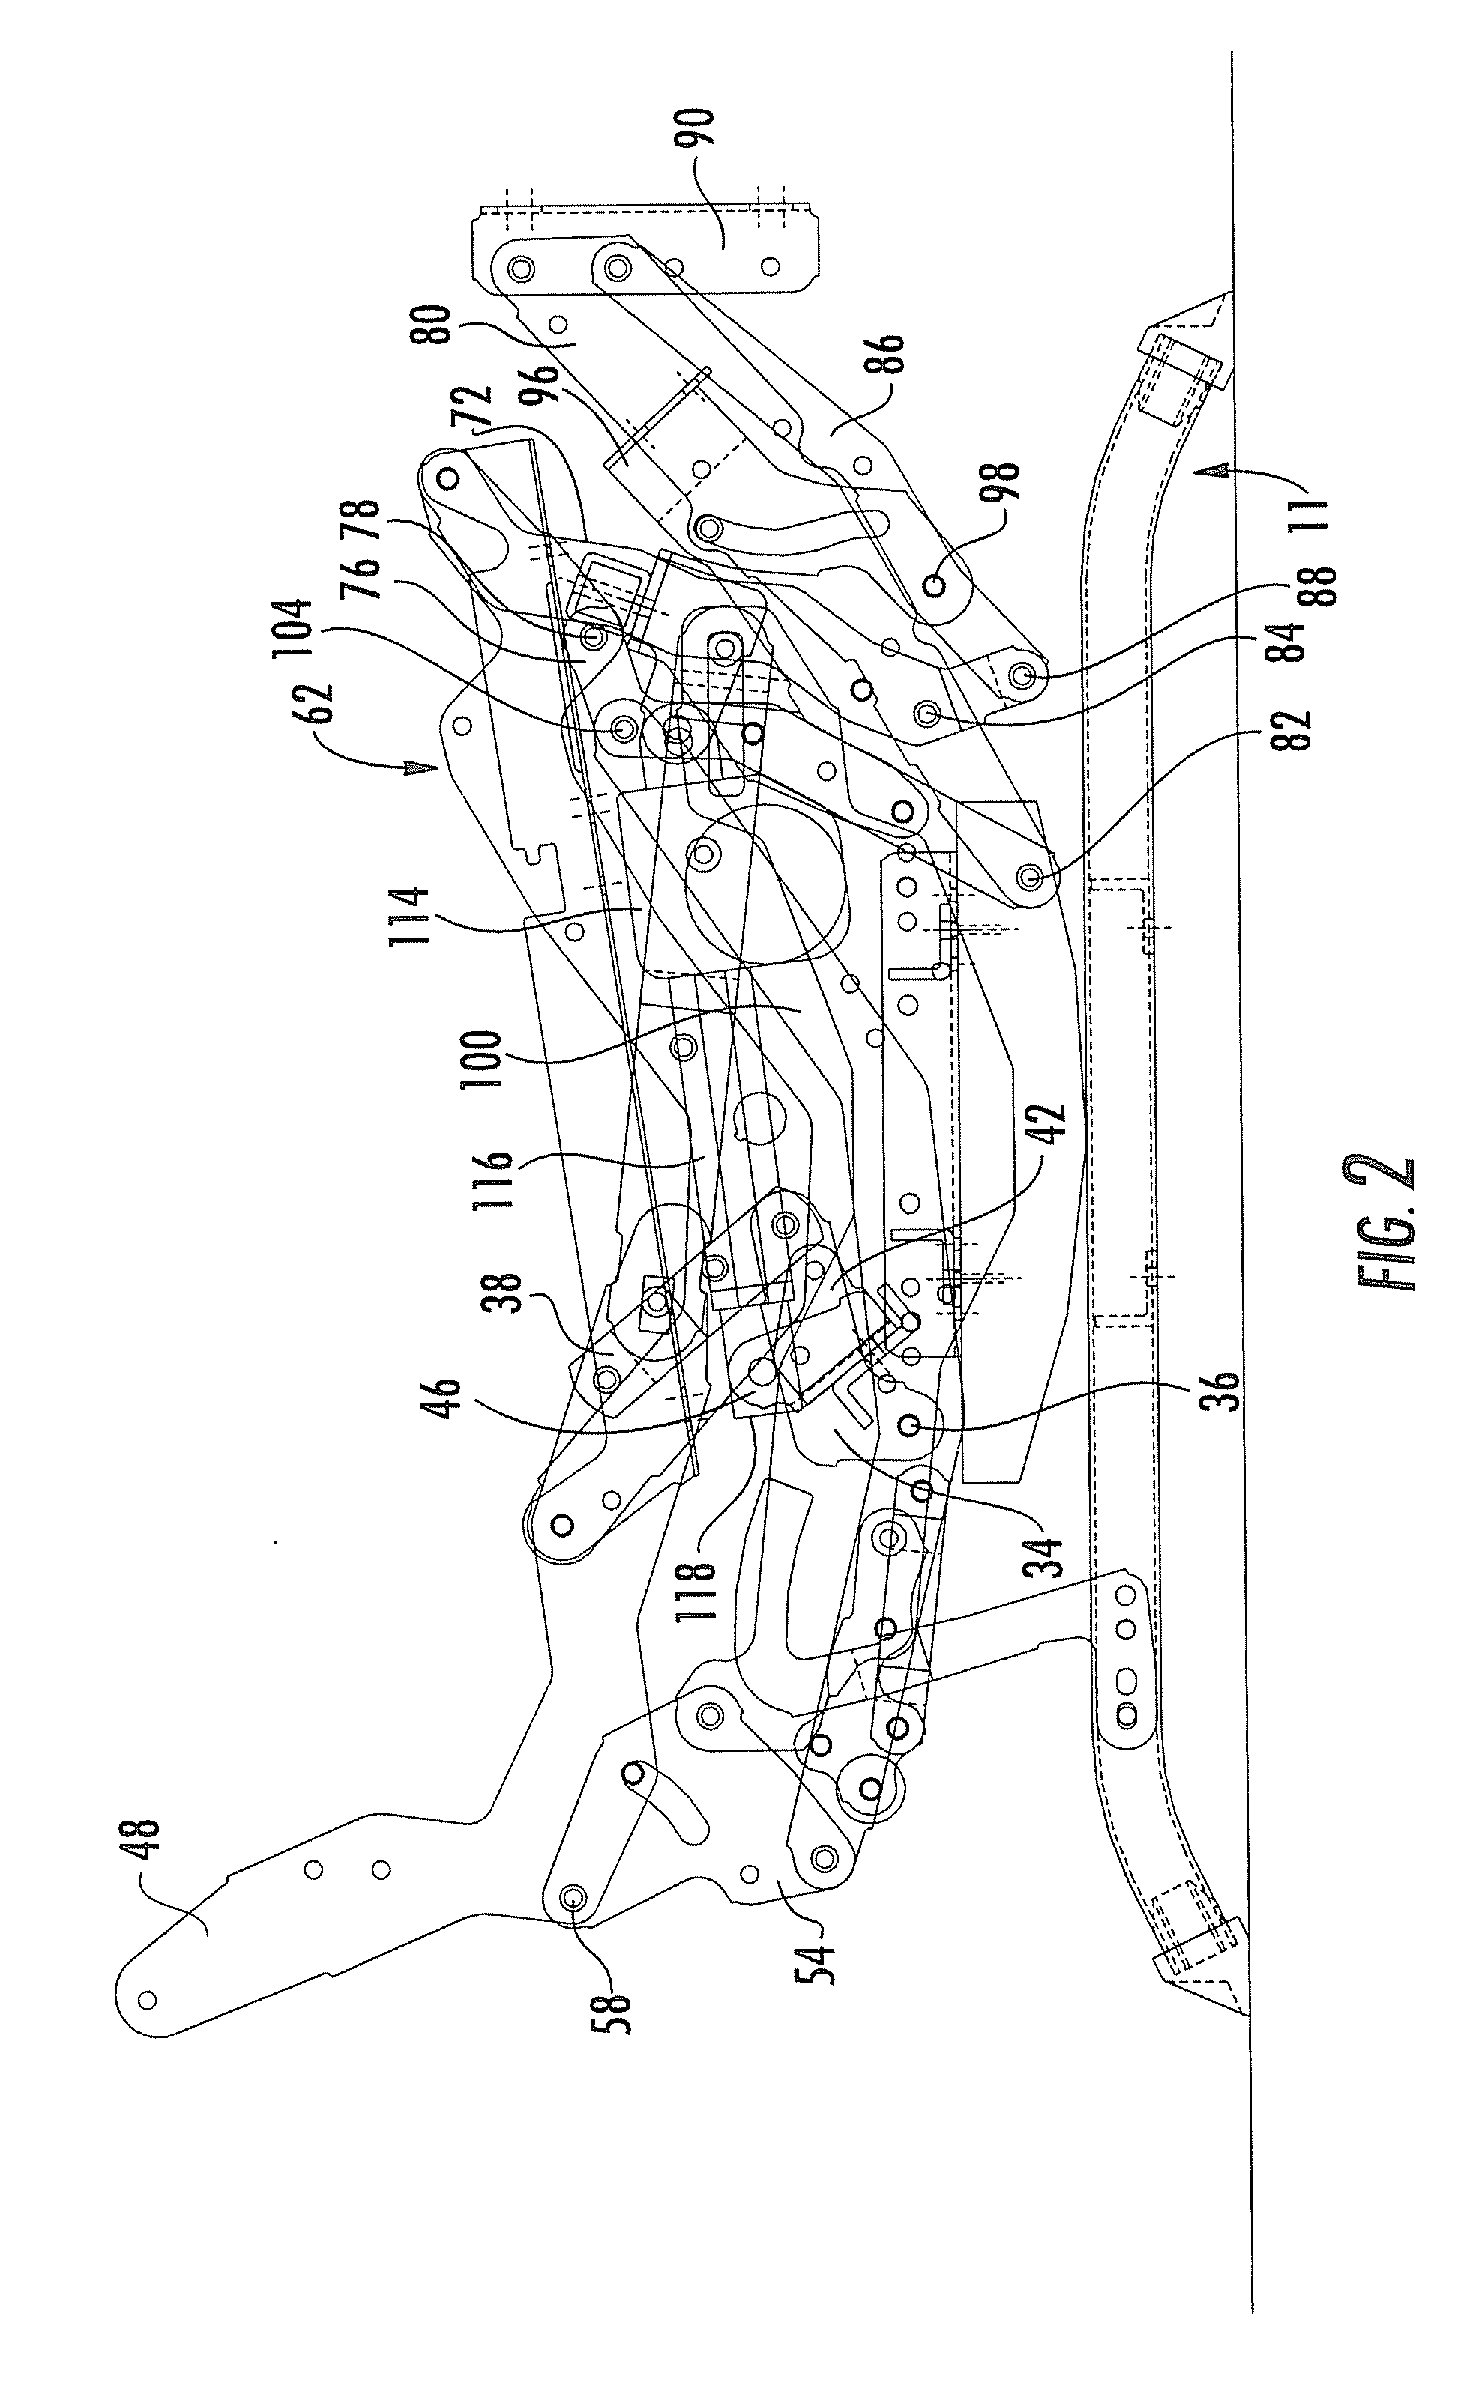 Locking unit for rocking-reclining seating unit with power actuator